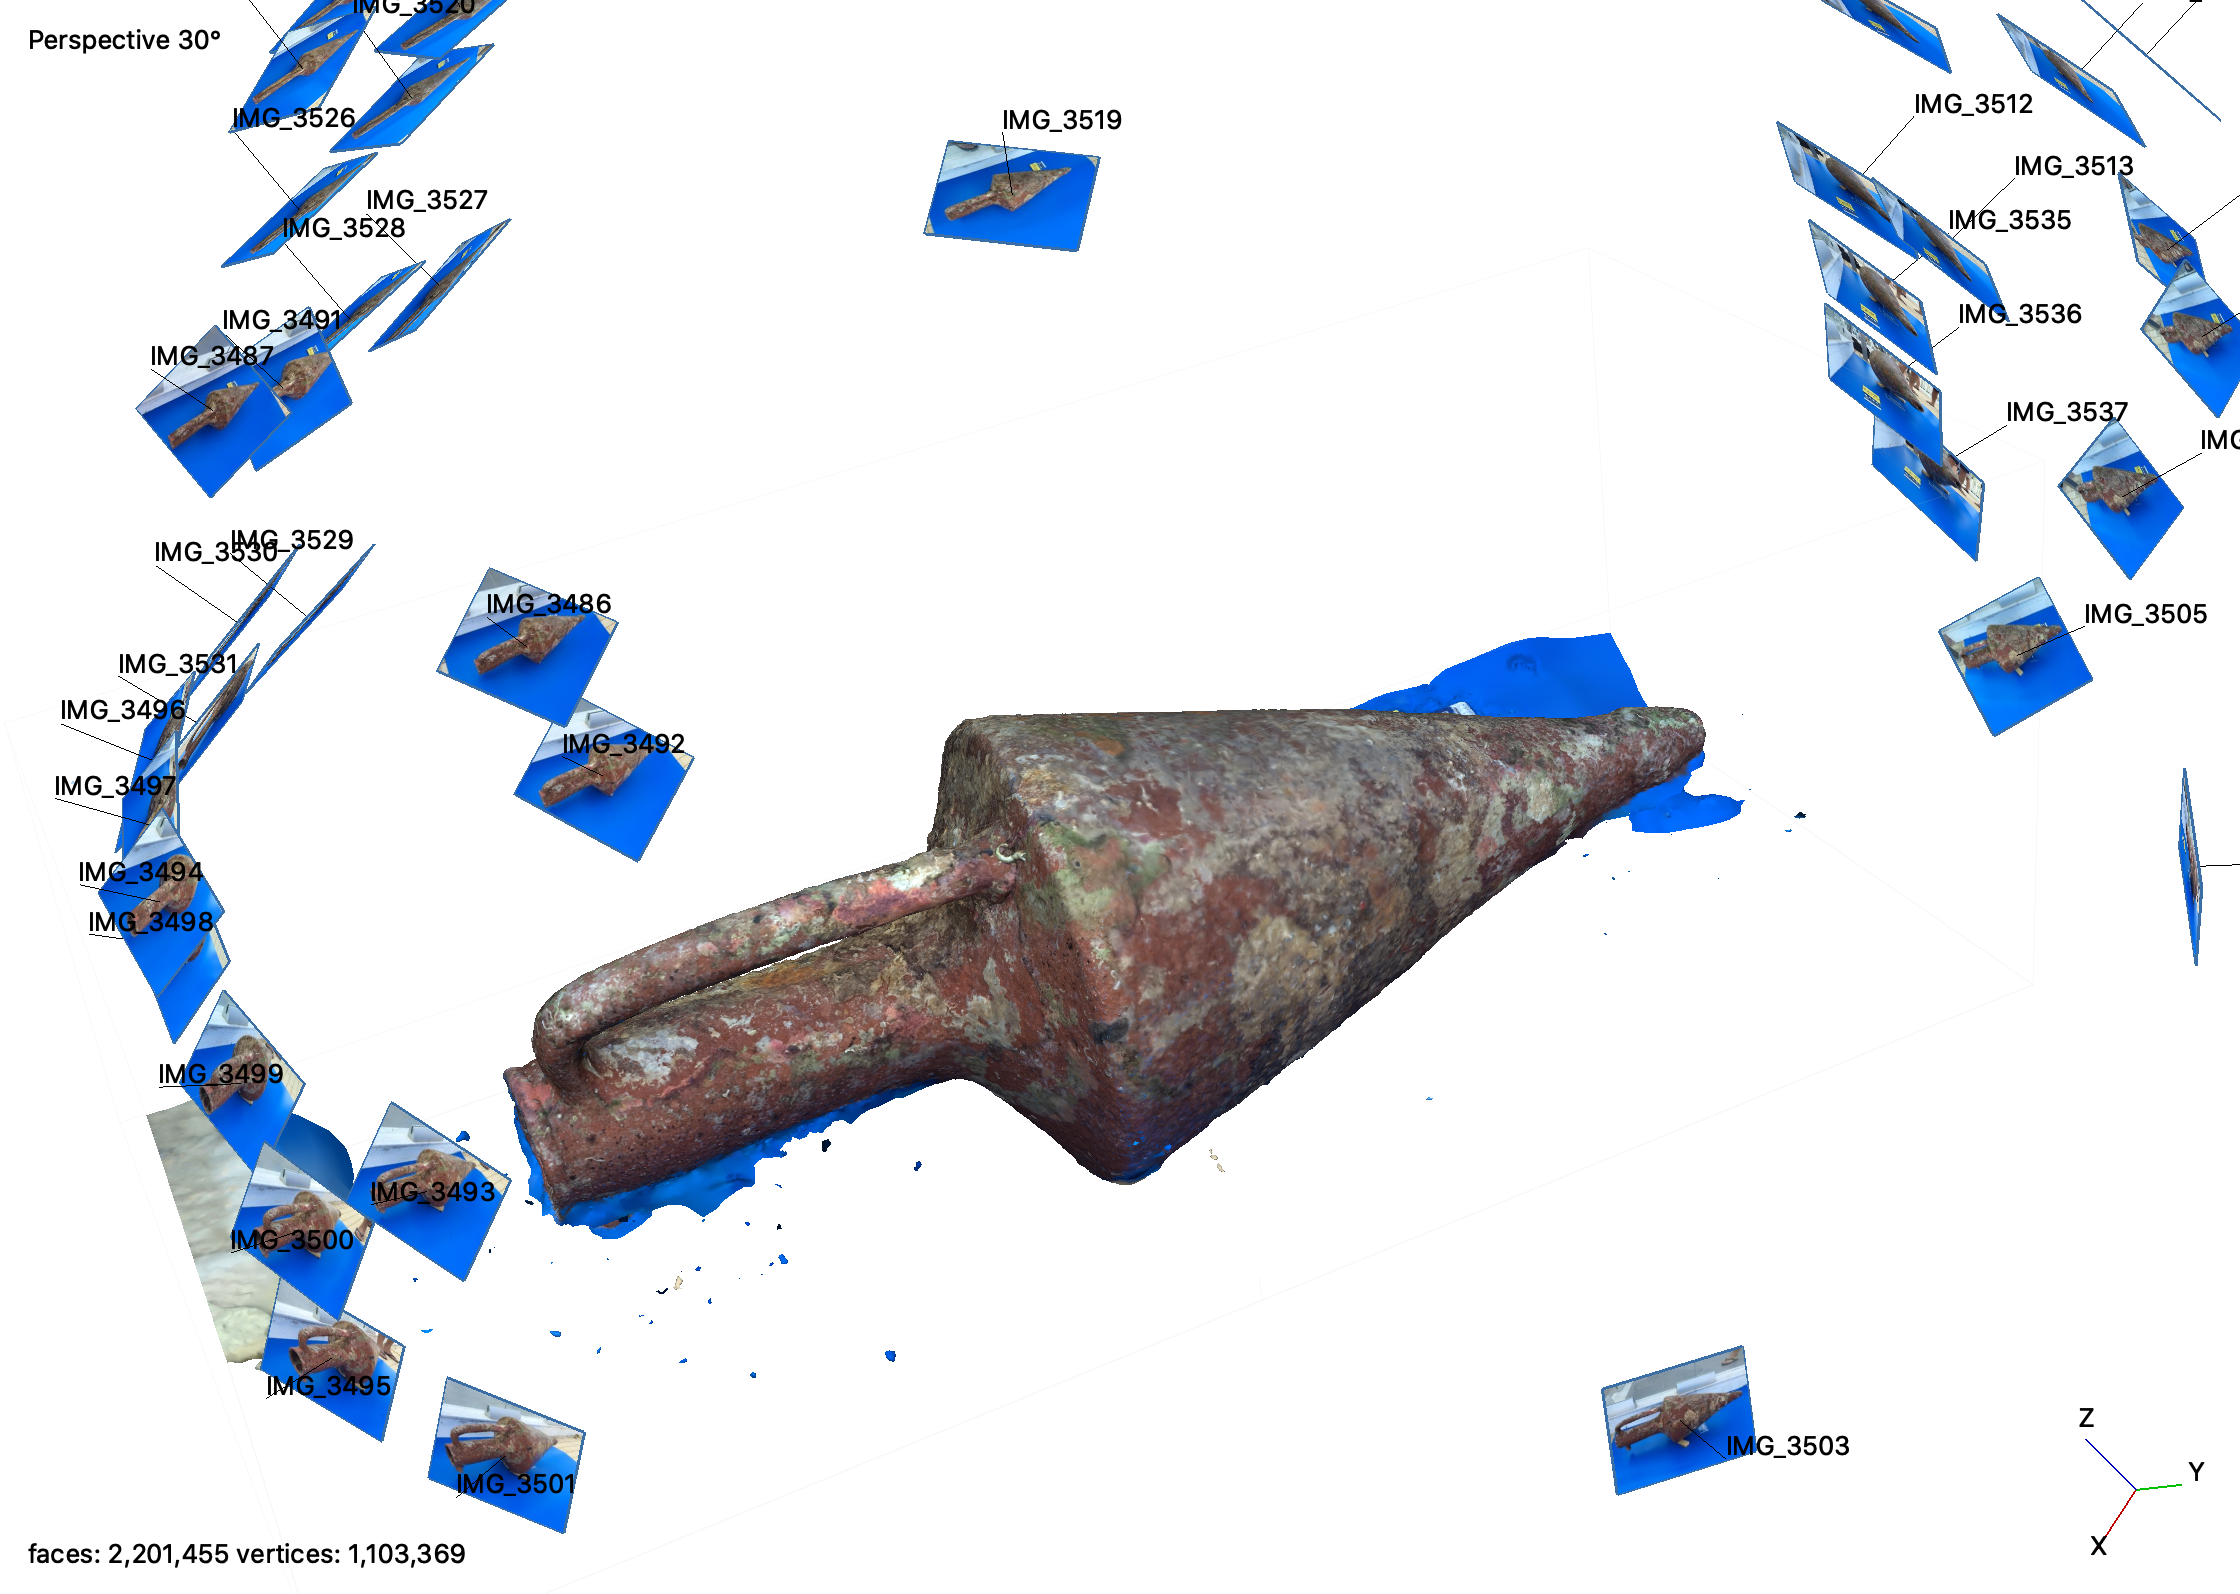 A polygon mesh is developed so texture-mapping can be applied to the artifact model. Photo by Christopher Drew